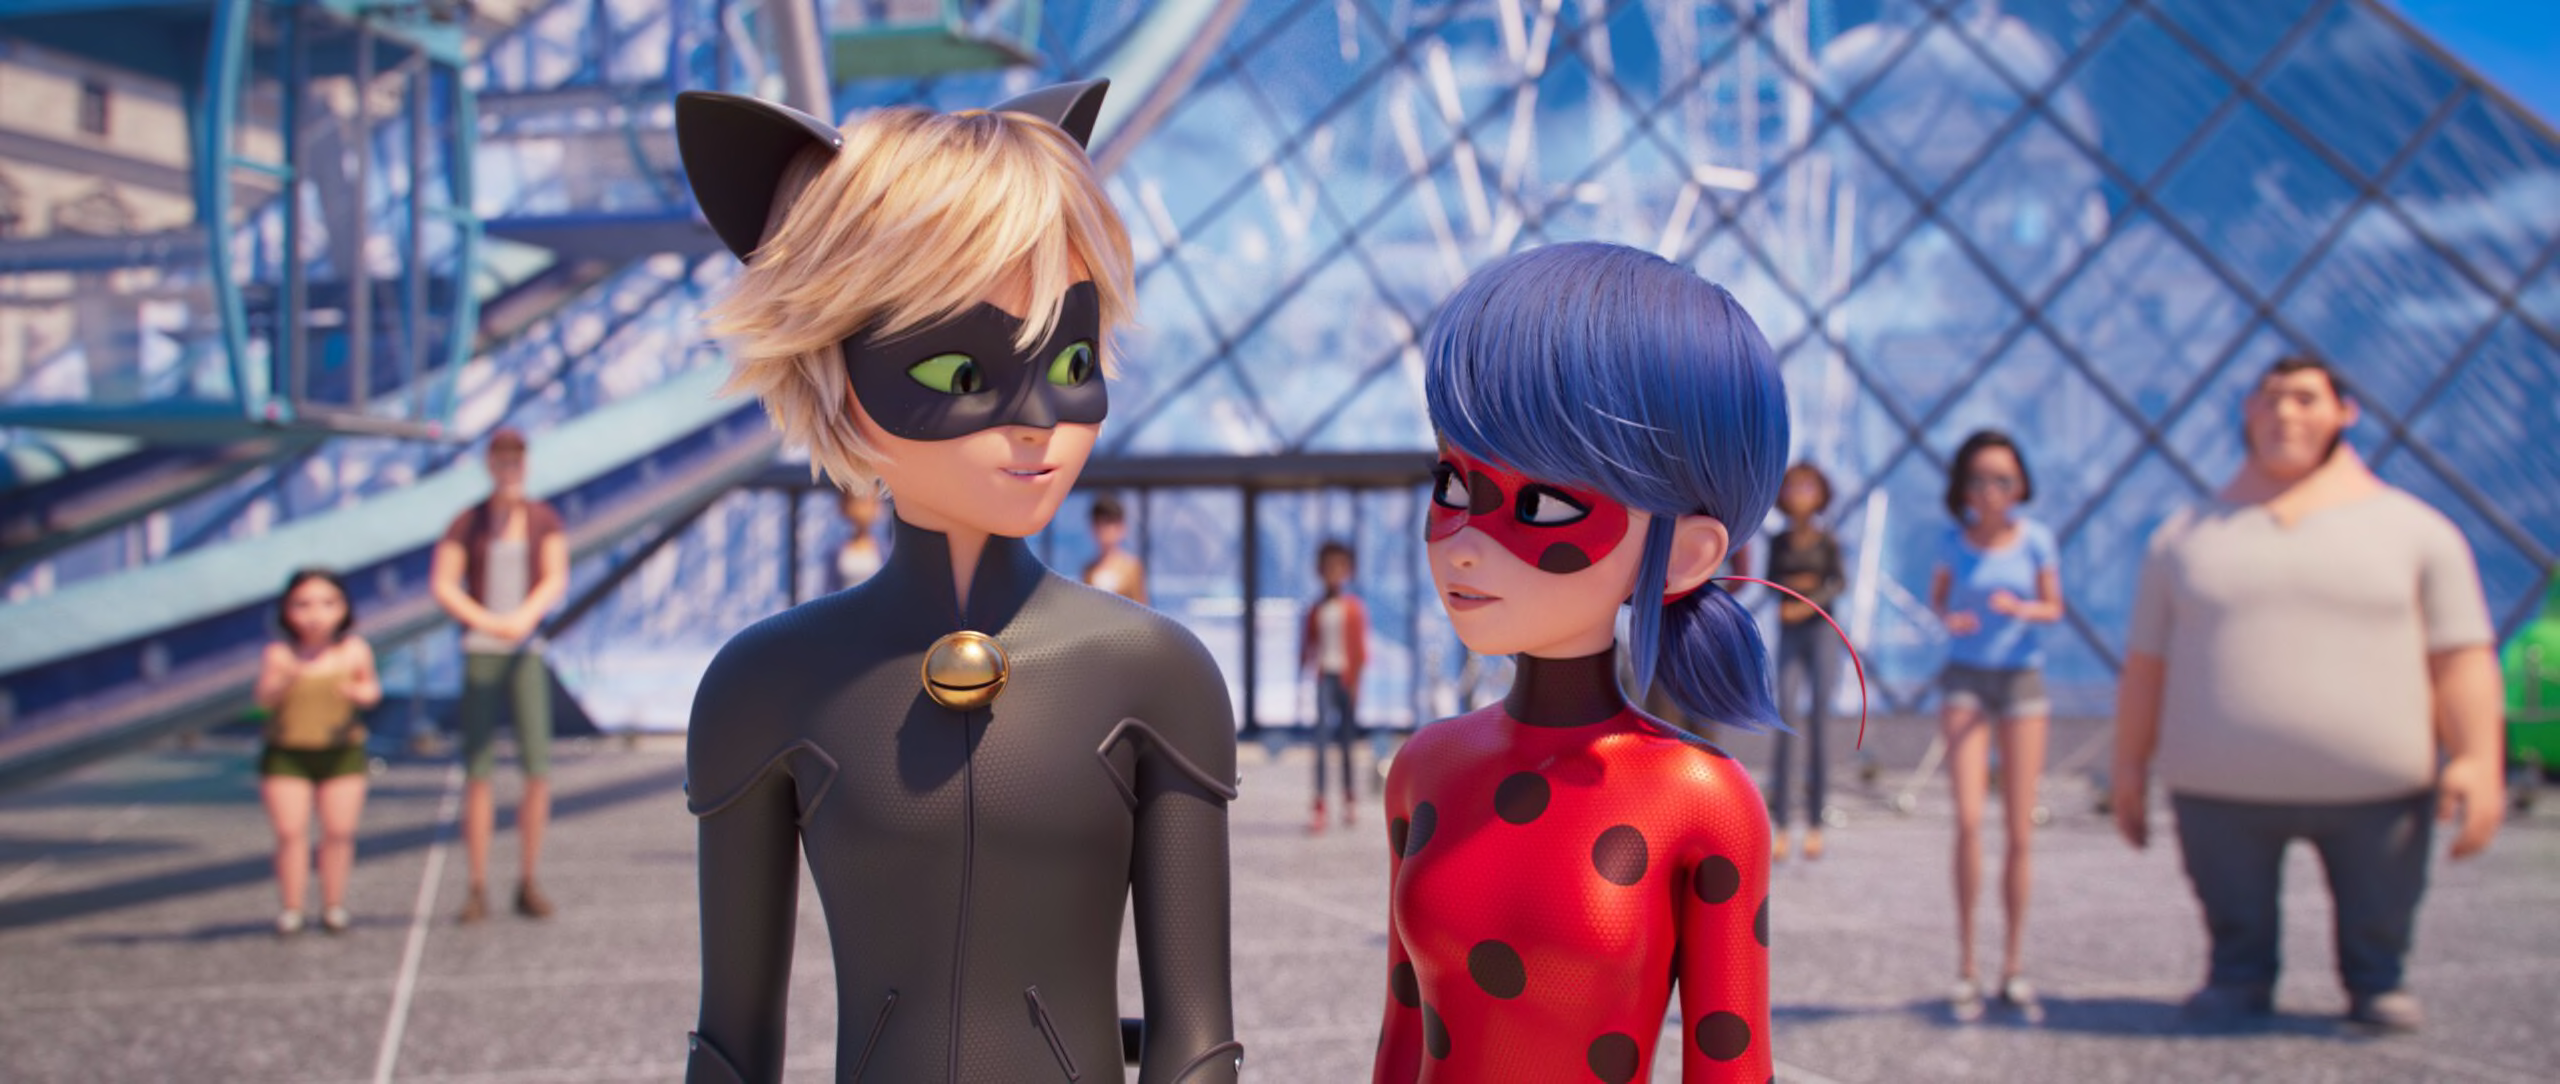 Miraculous: Ladybug & Cat Noir: The Movie' Coming to Netflix in July 2023 -  What's on Netflix